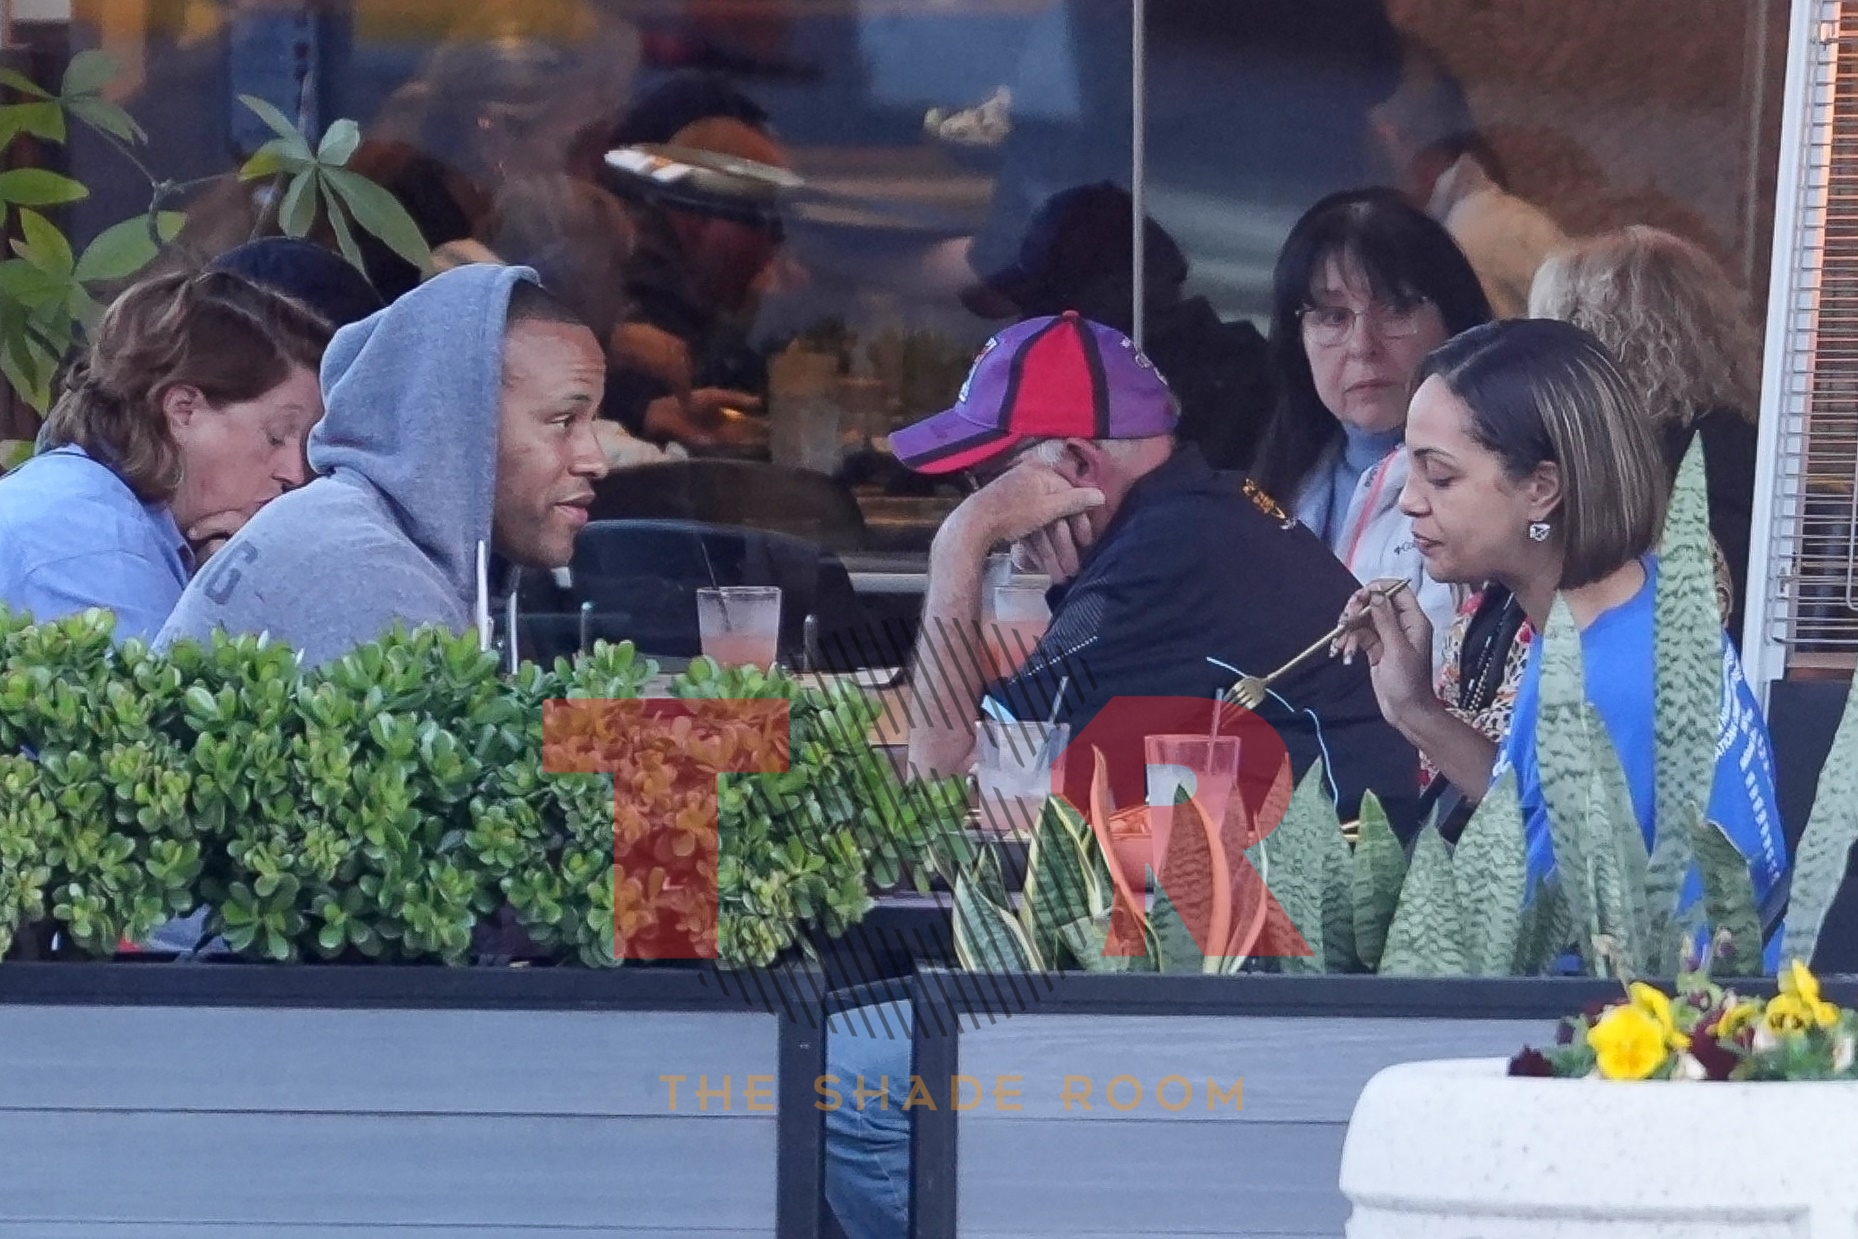 Bae Watch! Meagan Good's Ex-Husband DeVon Franklin Is Spotted On A Date With A Mystery Woman ( EXCLUSIVE PHOTOS)